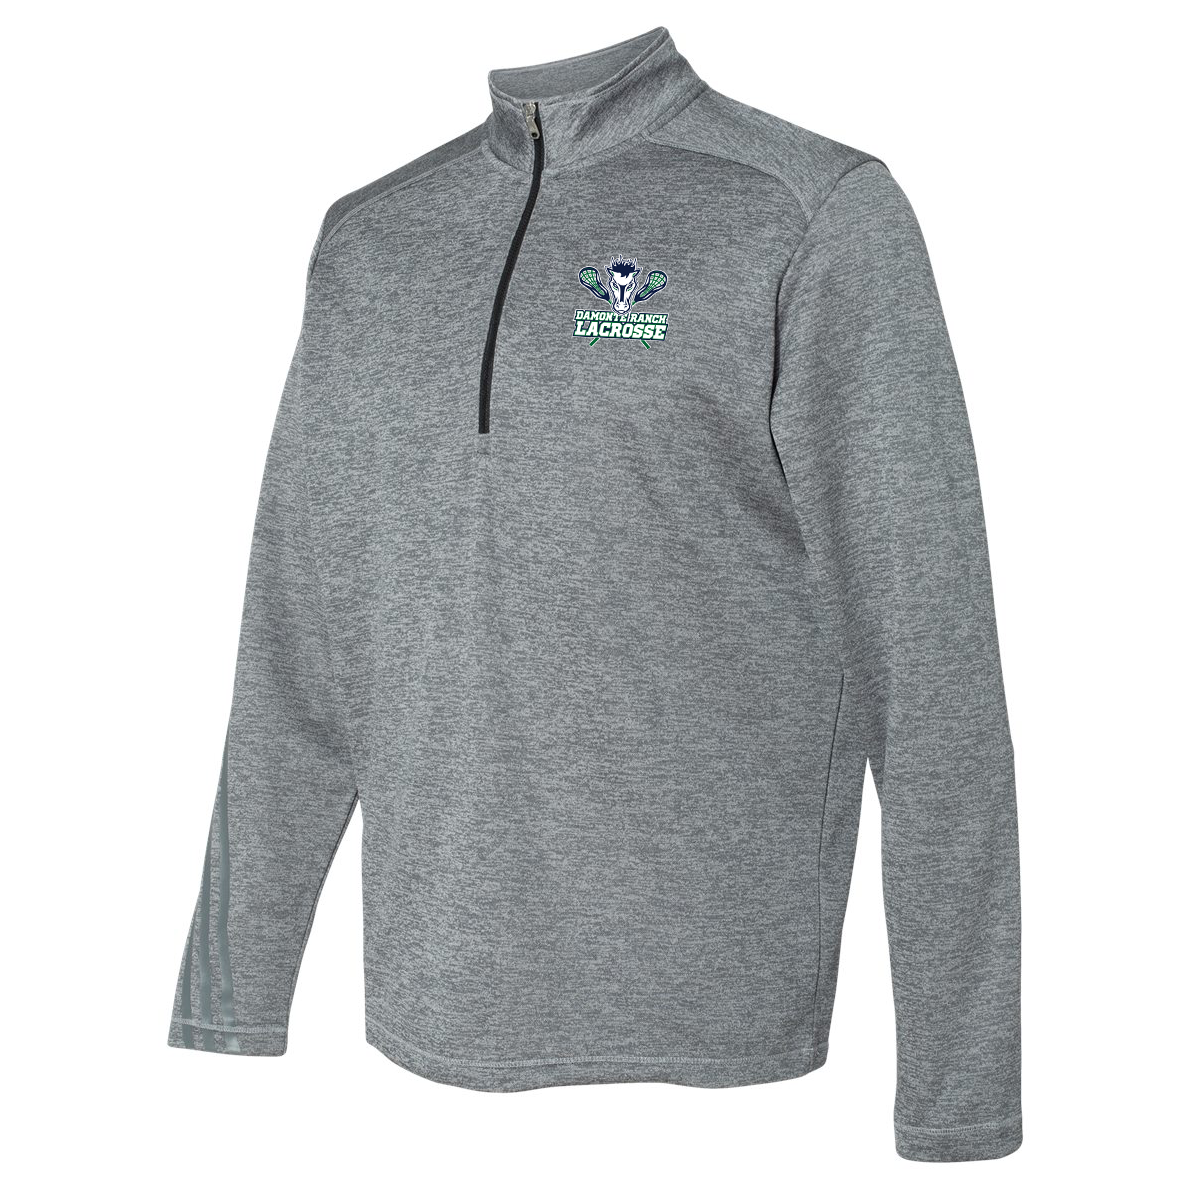 Damonte Ranch Lacrosse Adidas Terry Heathered Quarter-Zip Pullover